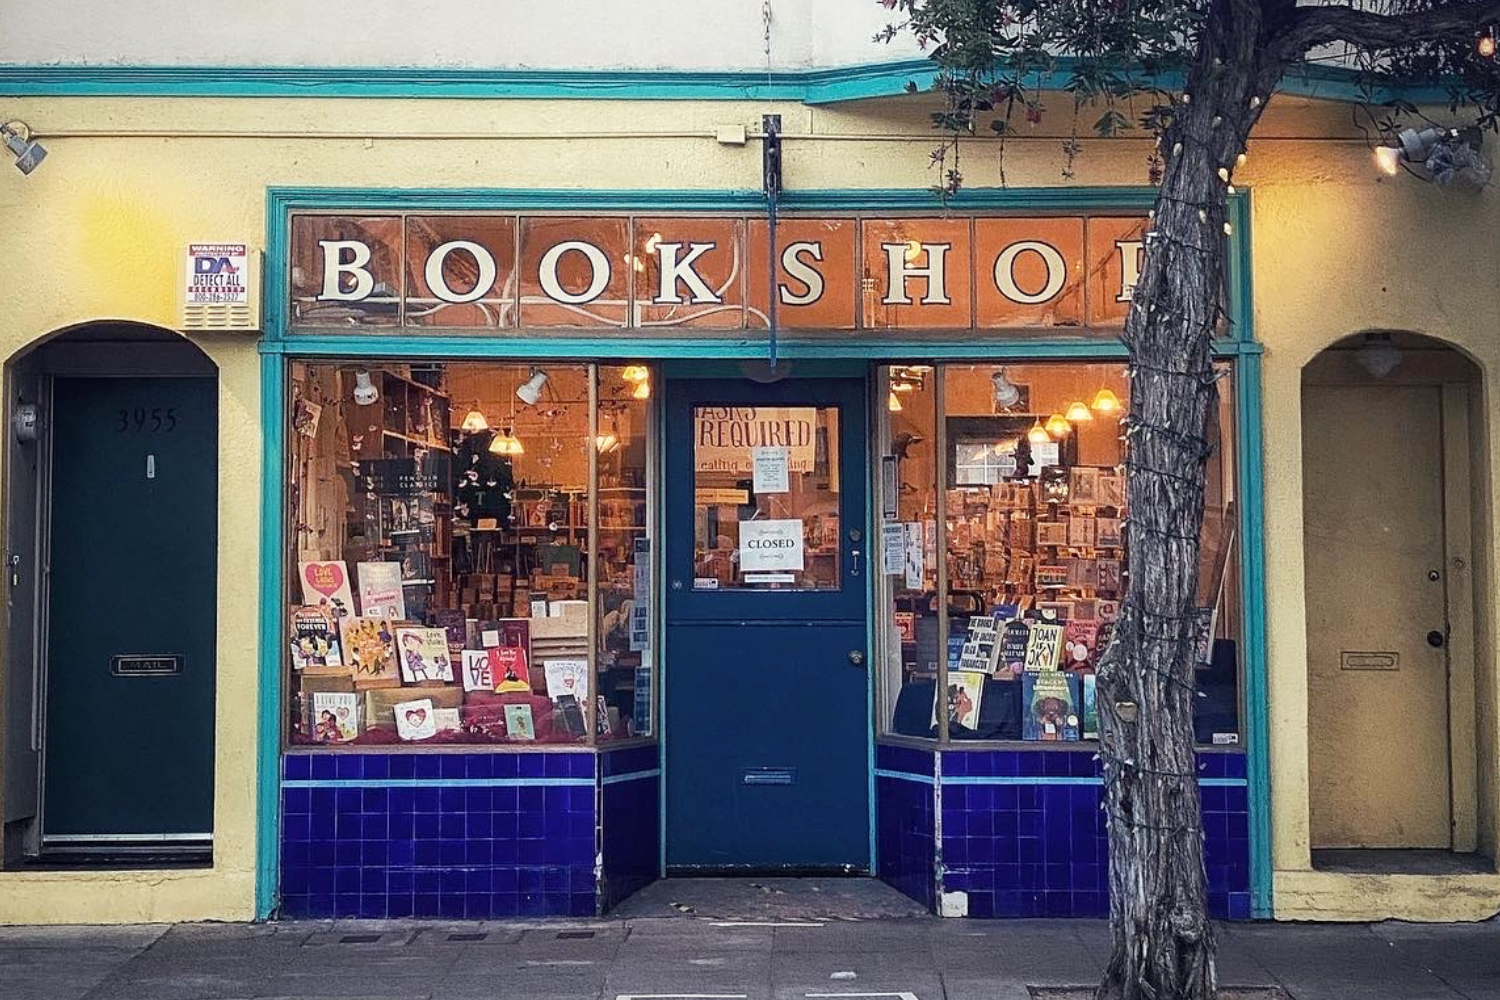 A quaint bookshop with a blue and yellow facade, large display windows, and a tree out front.